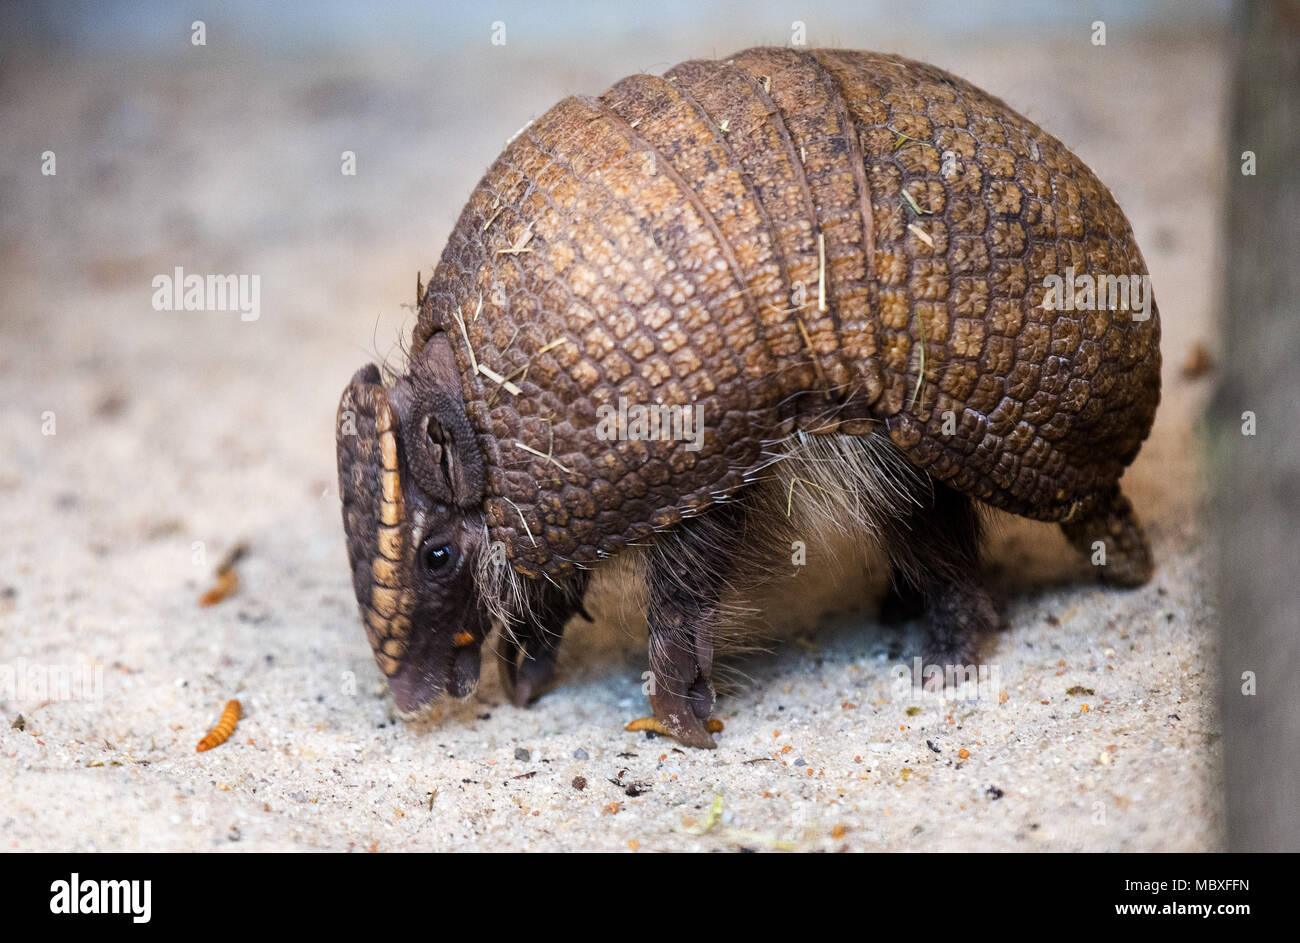 12 April 2018, Hoyerswerda, Germany: A southern banded armadillo (Tolypeutes matacus) in his enclosure at the tropical house of the Hoyerswerda Zoo, eating mealworm. This species lives in central South America and feeds mainly on Insects. Photo: Monika Skolimowska/dpa-Zentralbild/dpa Stock Photo